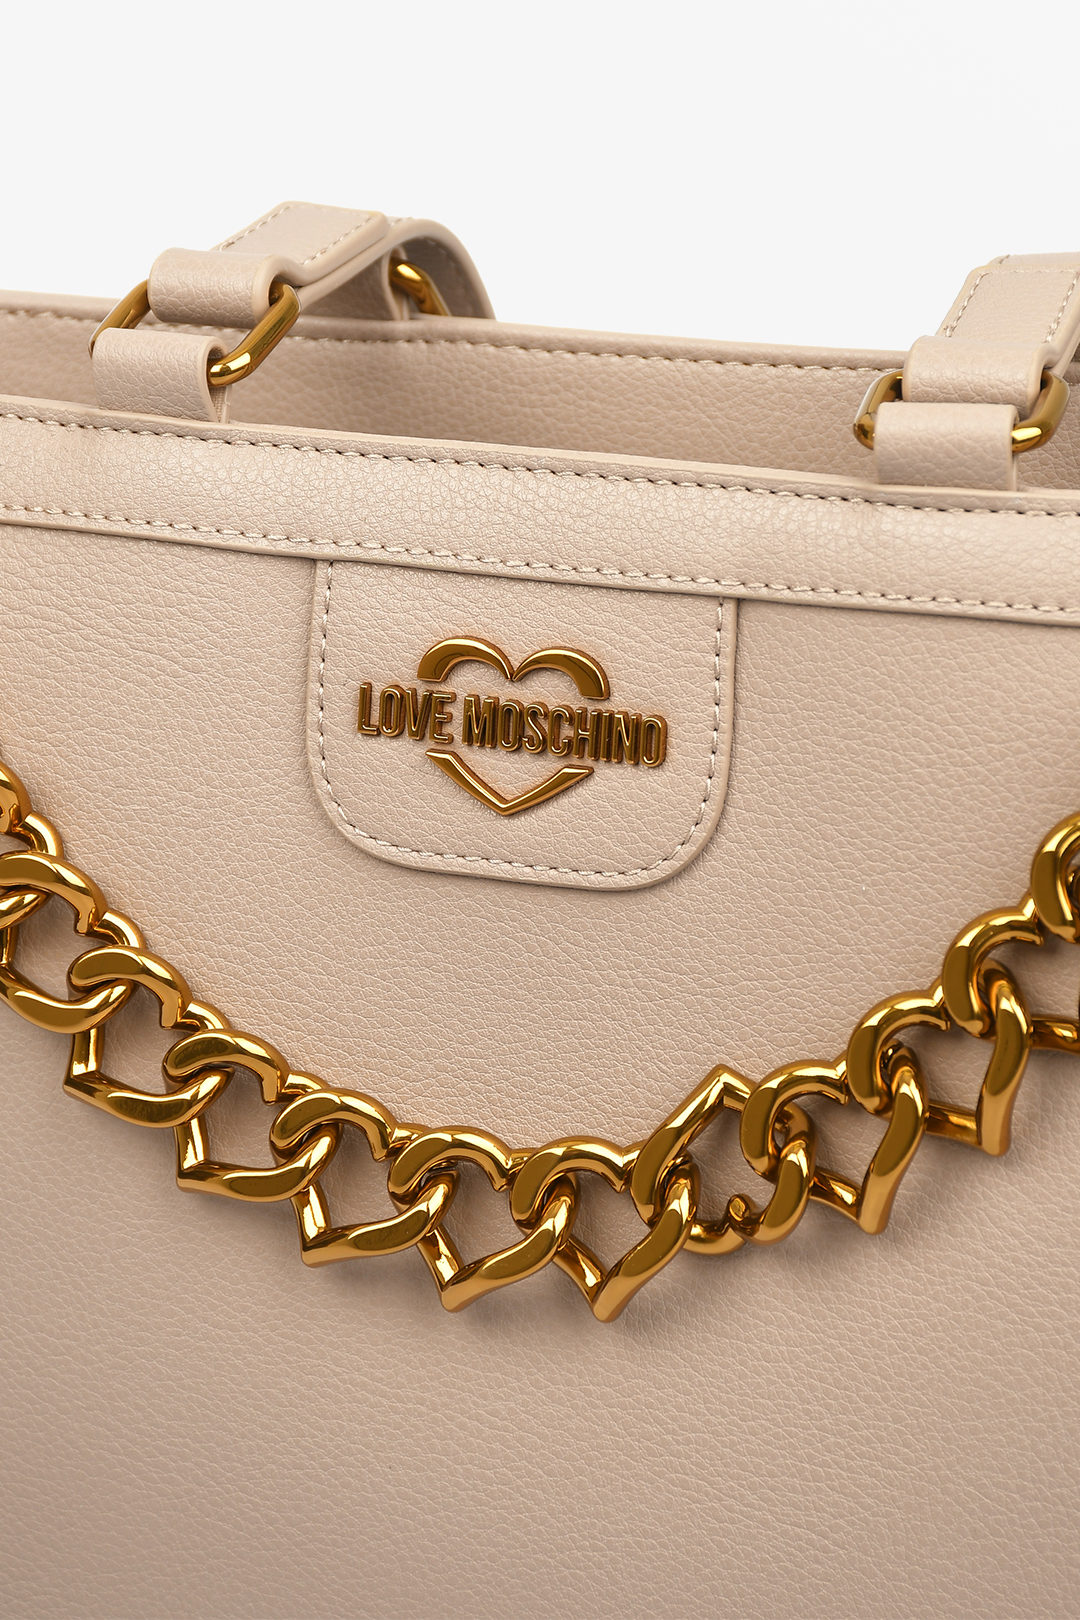 love moschino bag outlet